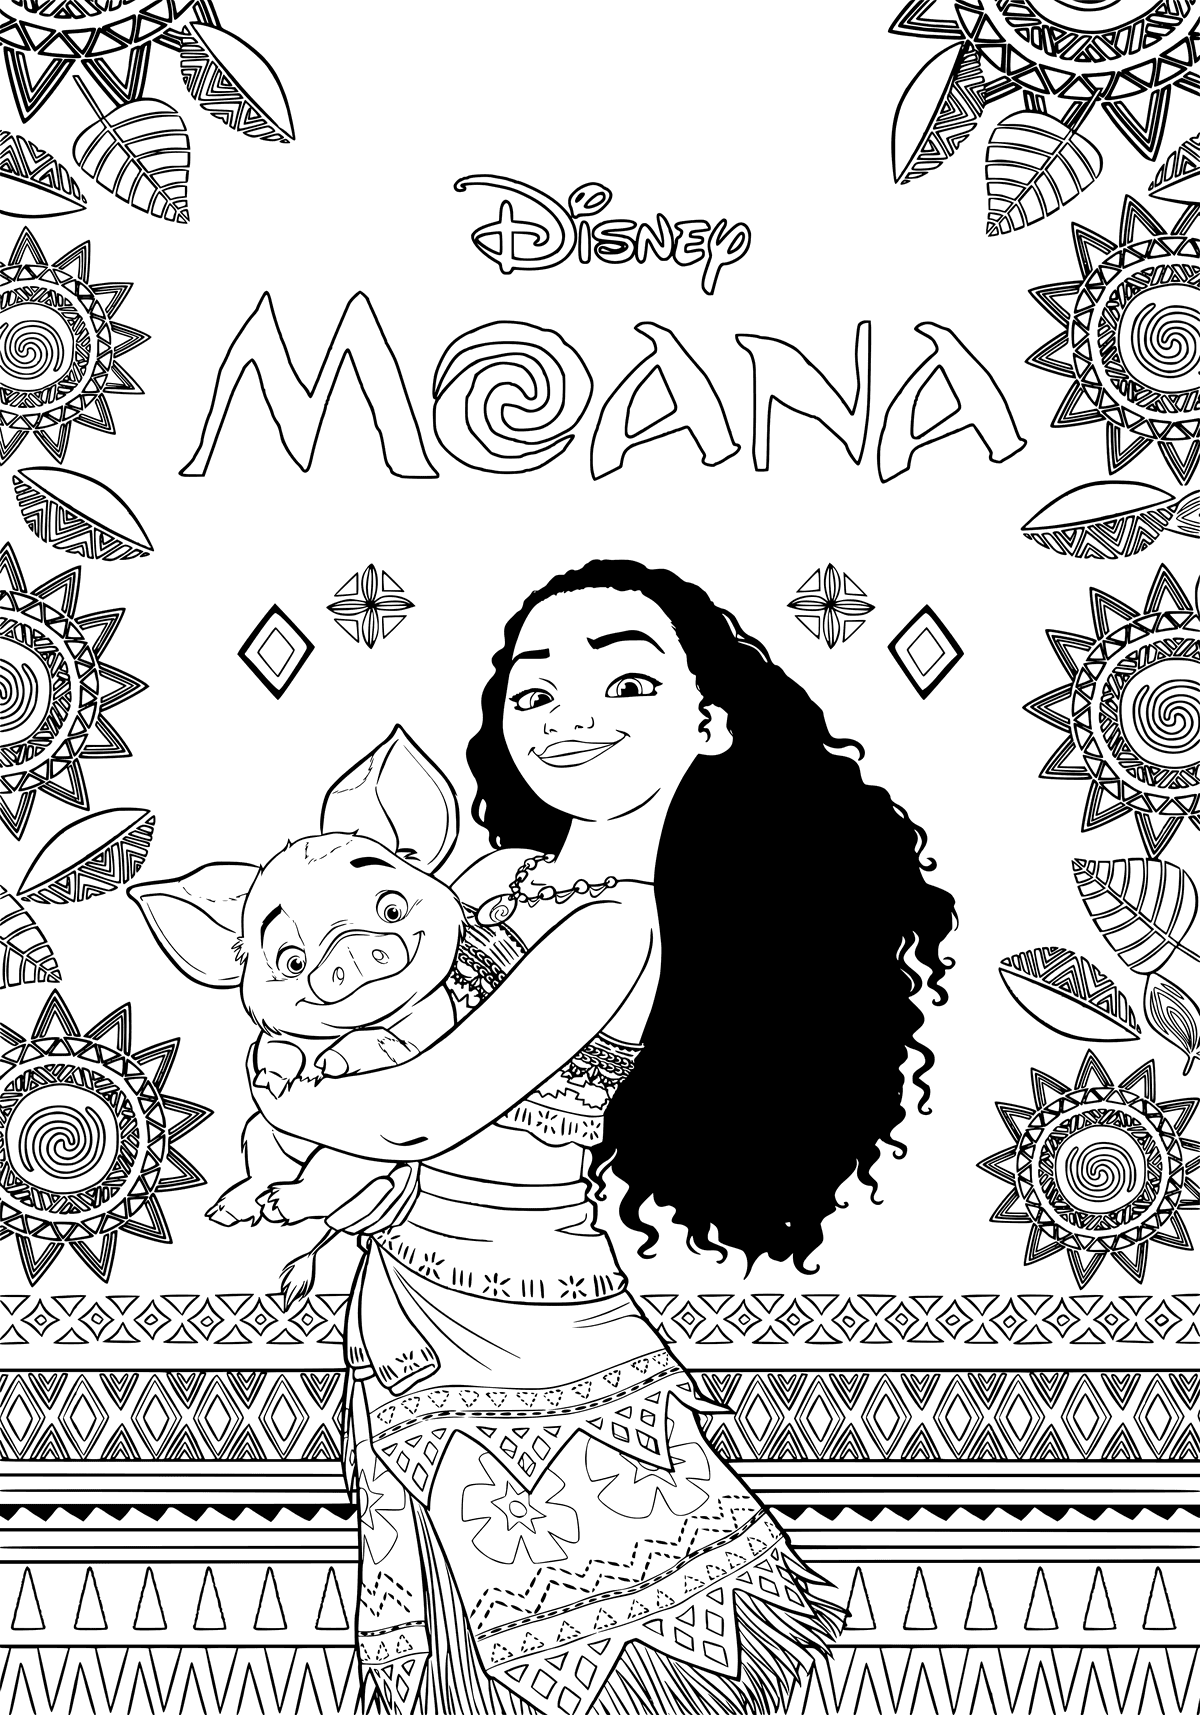 Moana Disney S New Instant Classic Is Getting Lots Of Play And There S Good Reason Wh